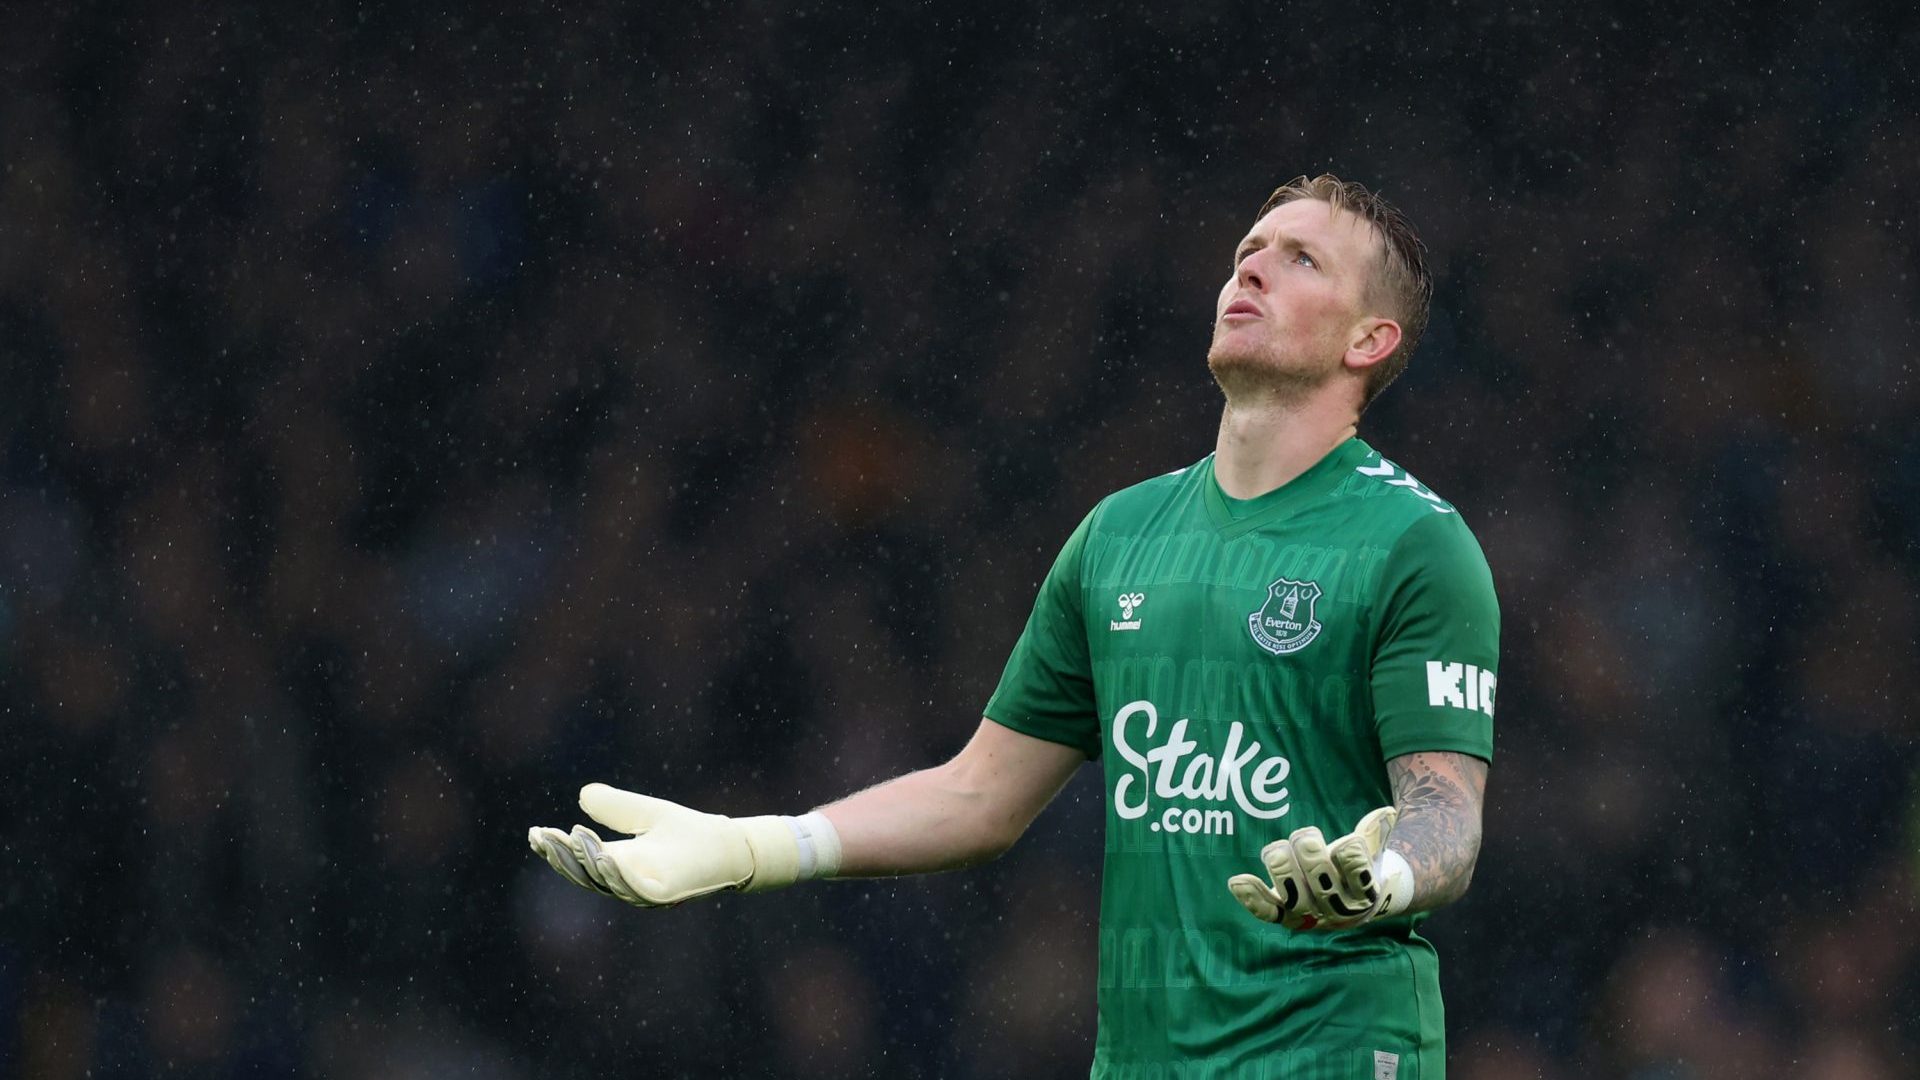 Jordan Pickford of Everton reacts during the Premier League match between Everton FC and Luton Town at Goodison Park. Photo: George Wood/Getty Images